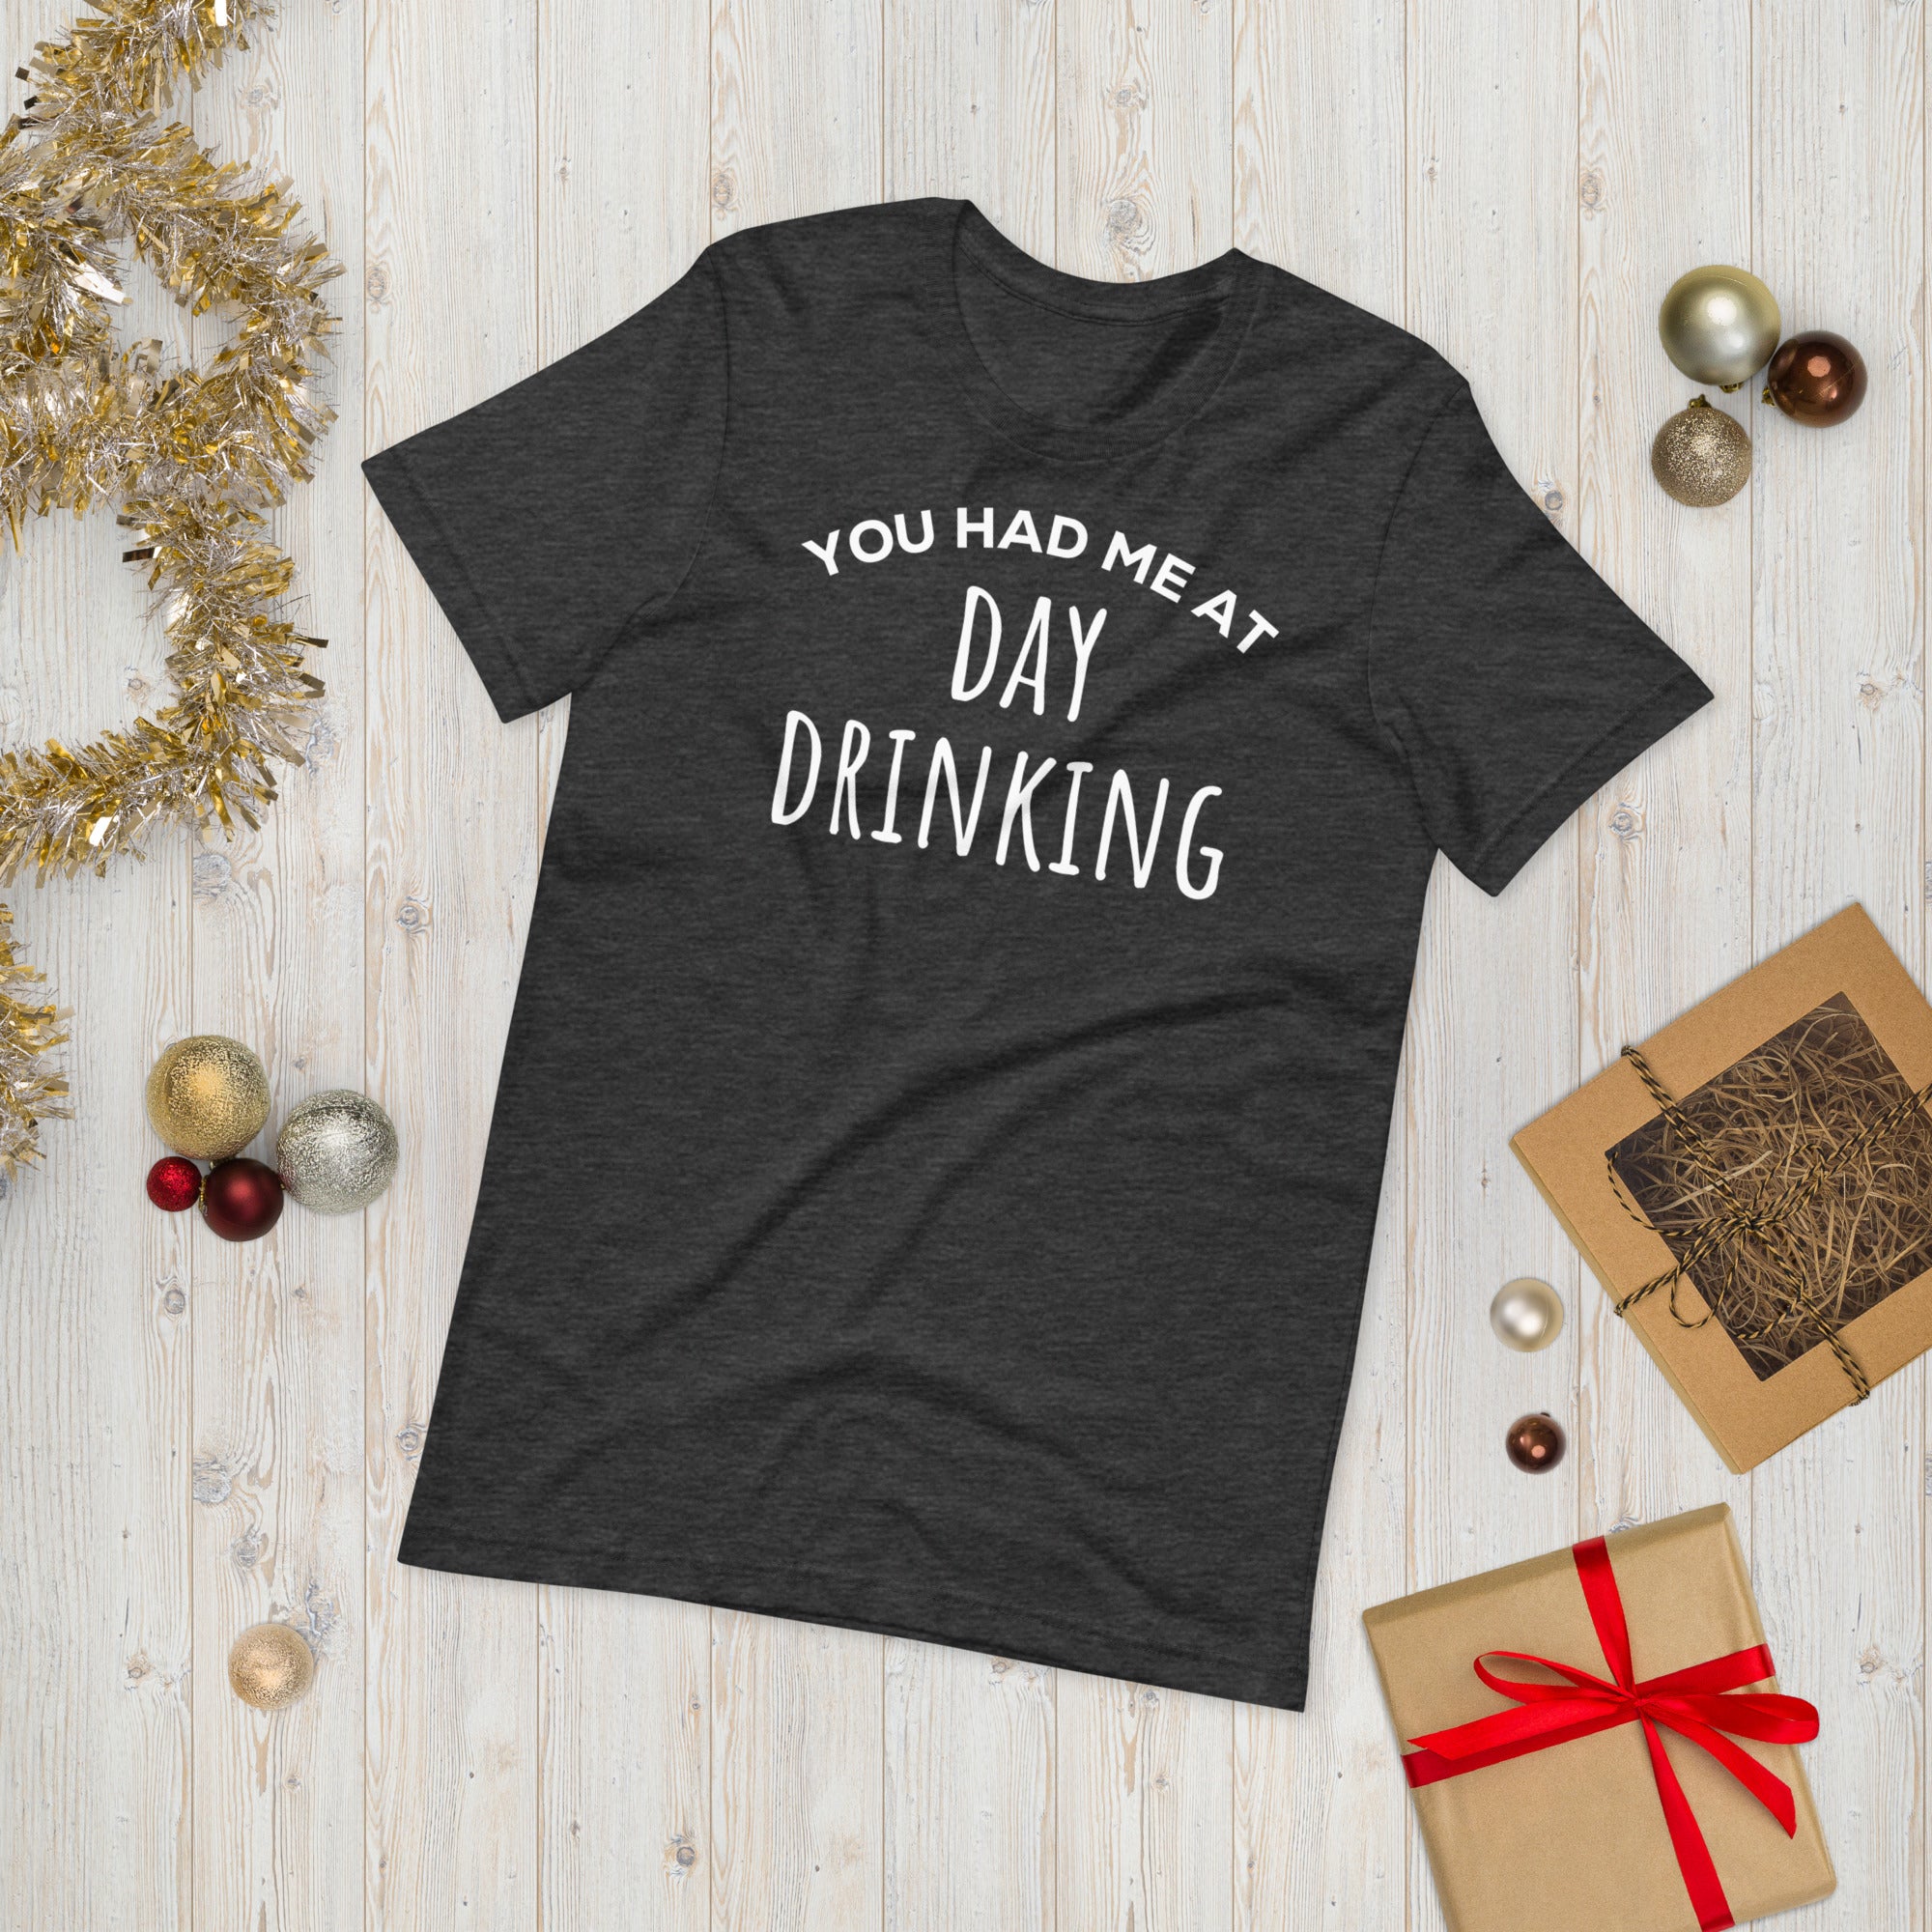 You Had Me At Day Drinking Shirt, Funny Day Drinker Shirt, Day Drinking Shirt, Drinking Shirt, Funny Drinking Shirt, Drinking Team Gifts - Madeinsea©